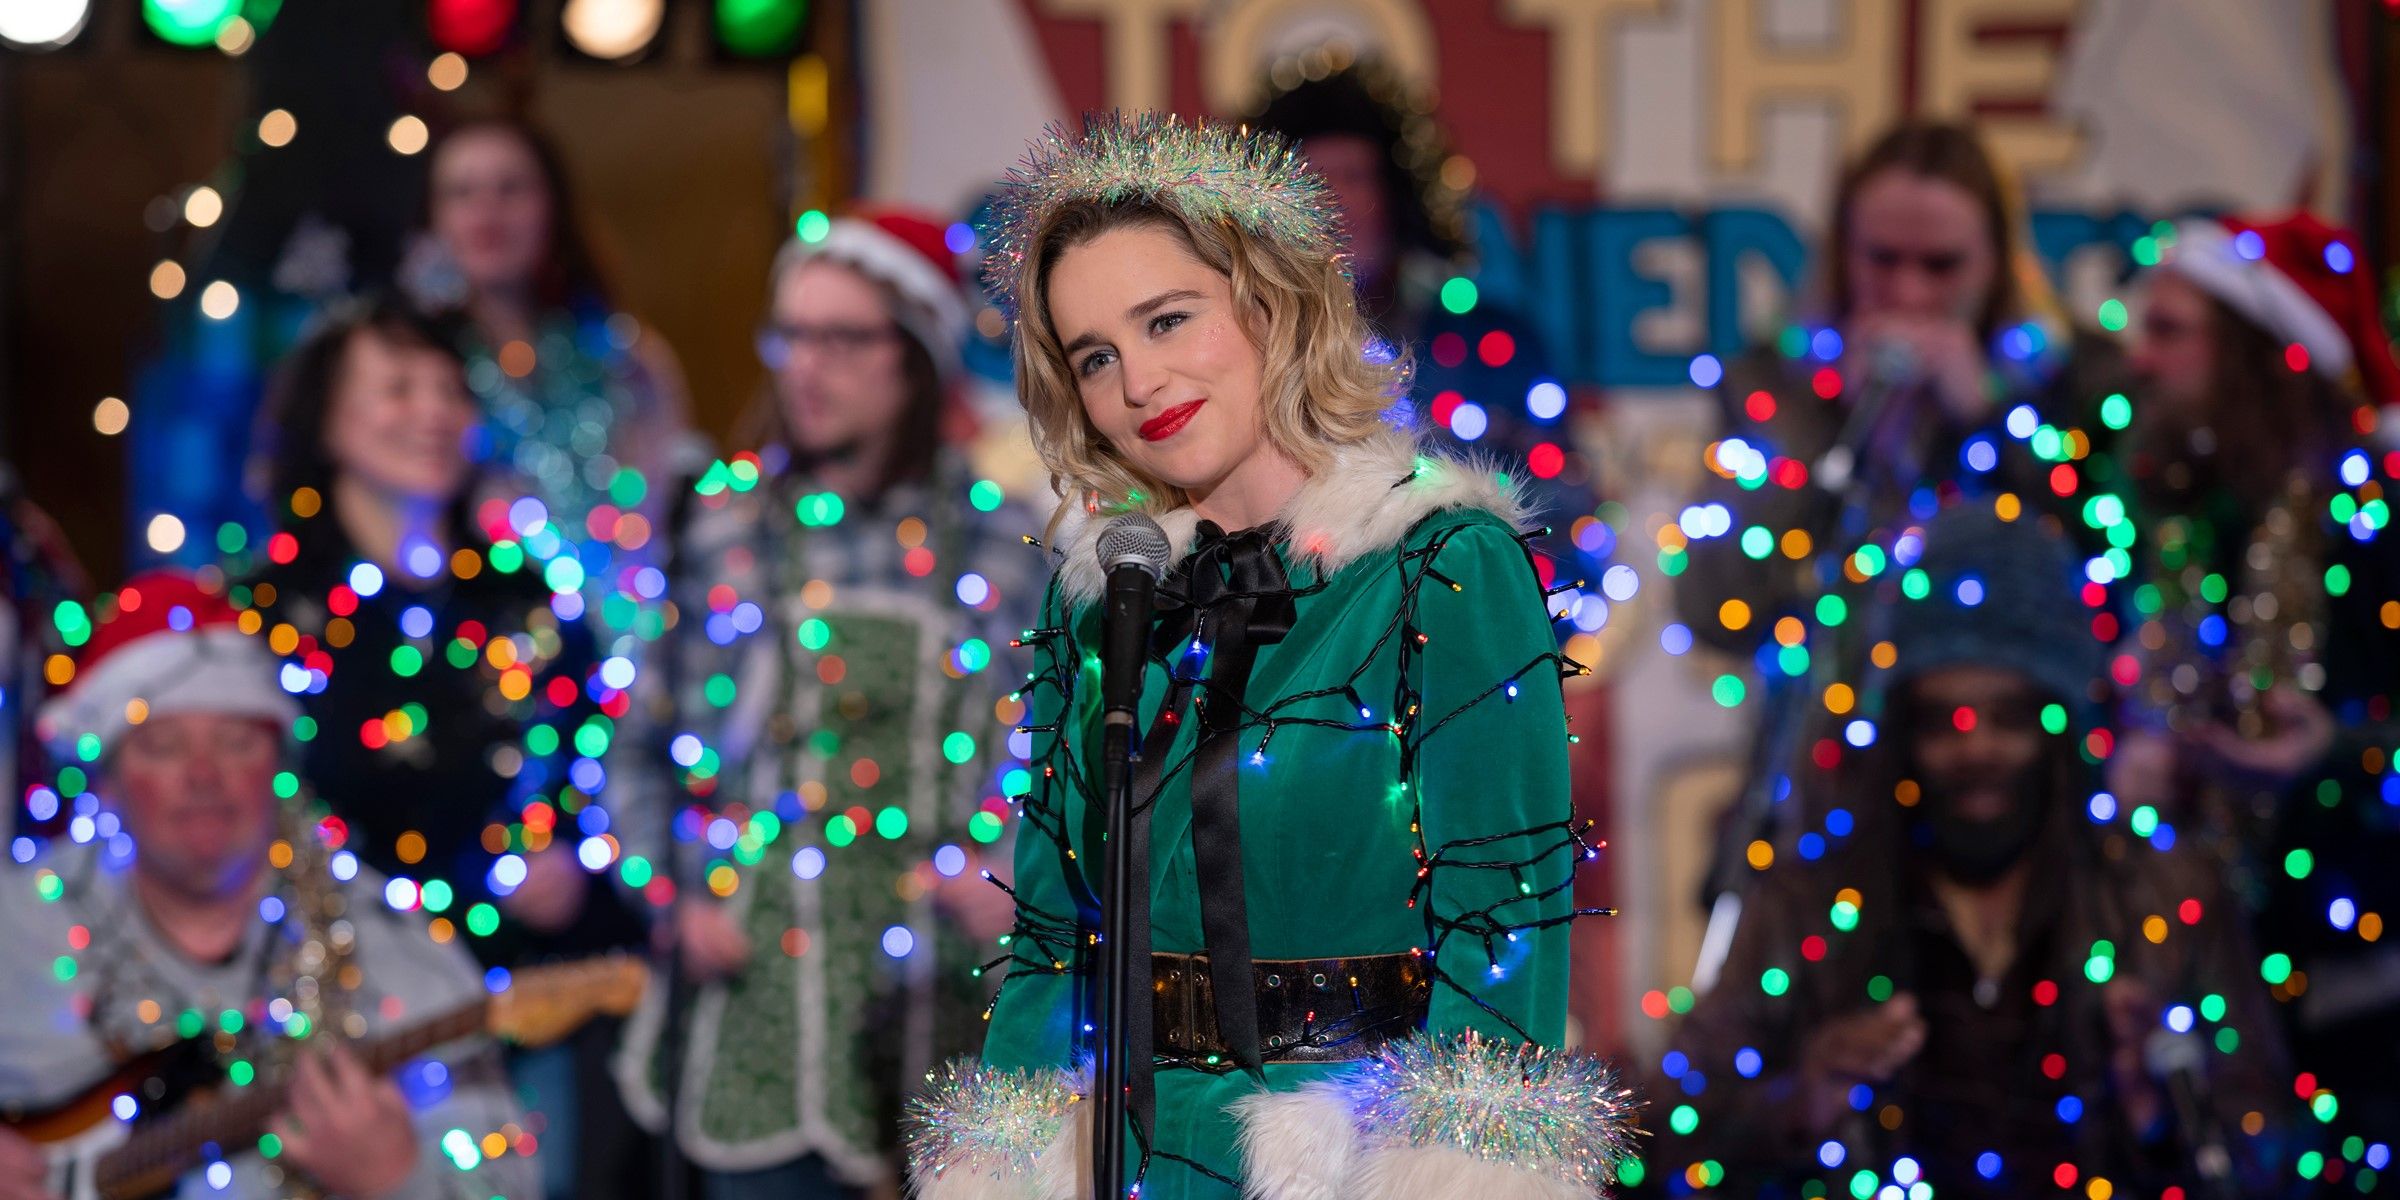 Kate on stage at the microphone in her Christmas lights in Last Christmas